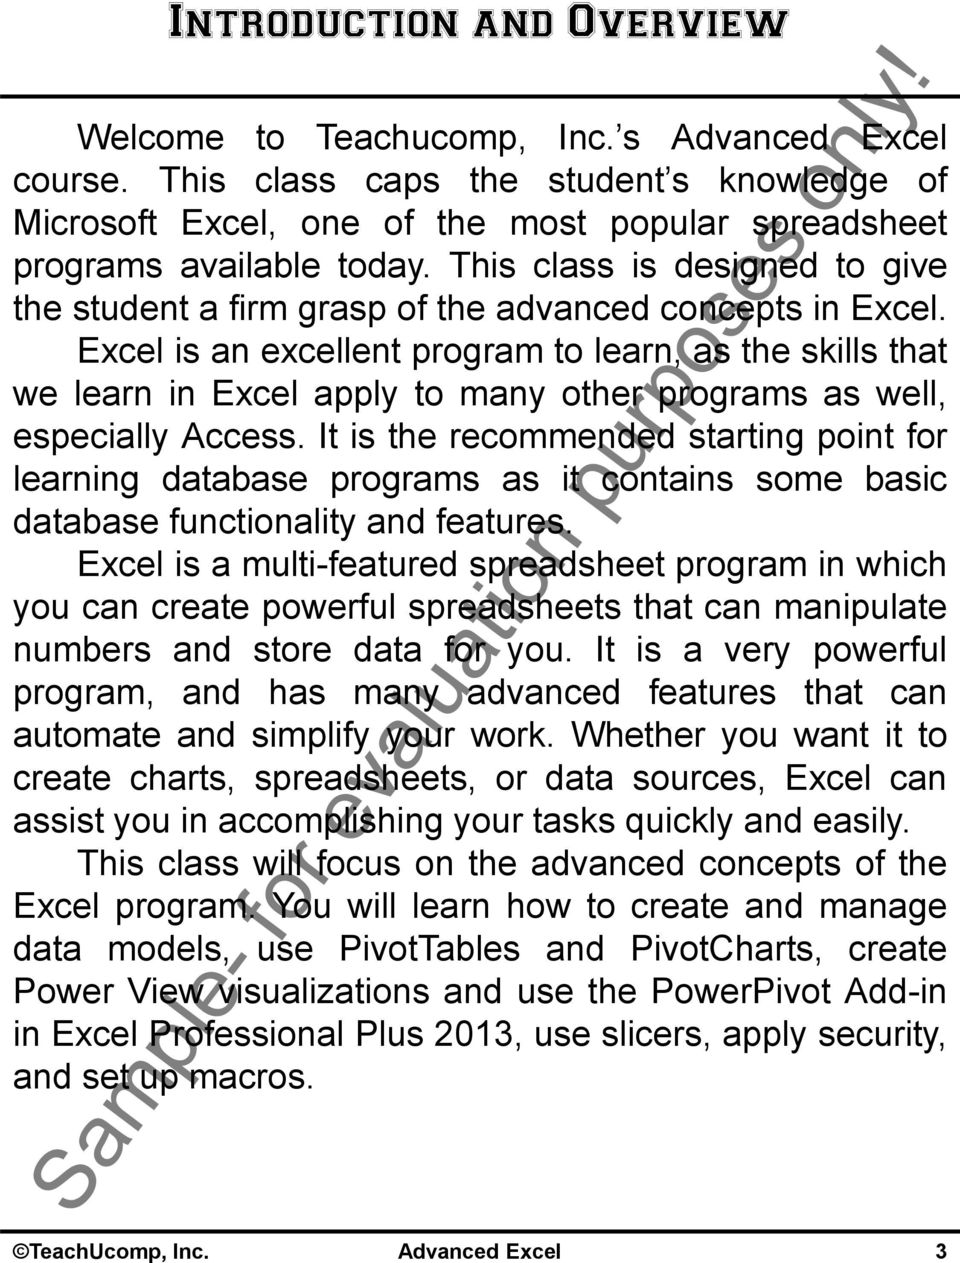 Excel is an excellent program to learn, as the skills that we learn in Excel apply to many other programs as well, especially Access.